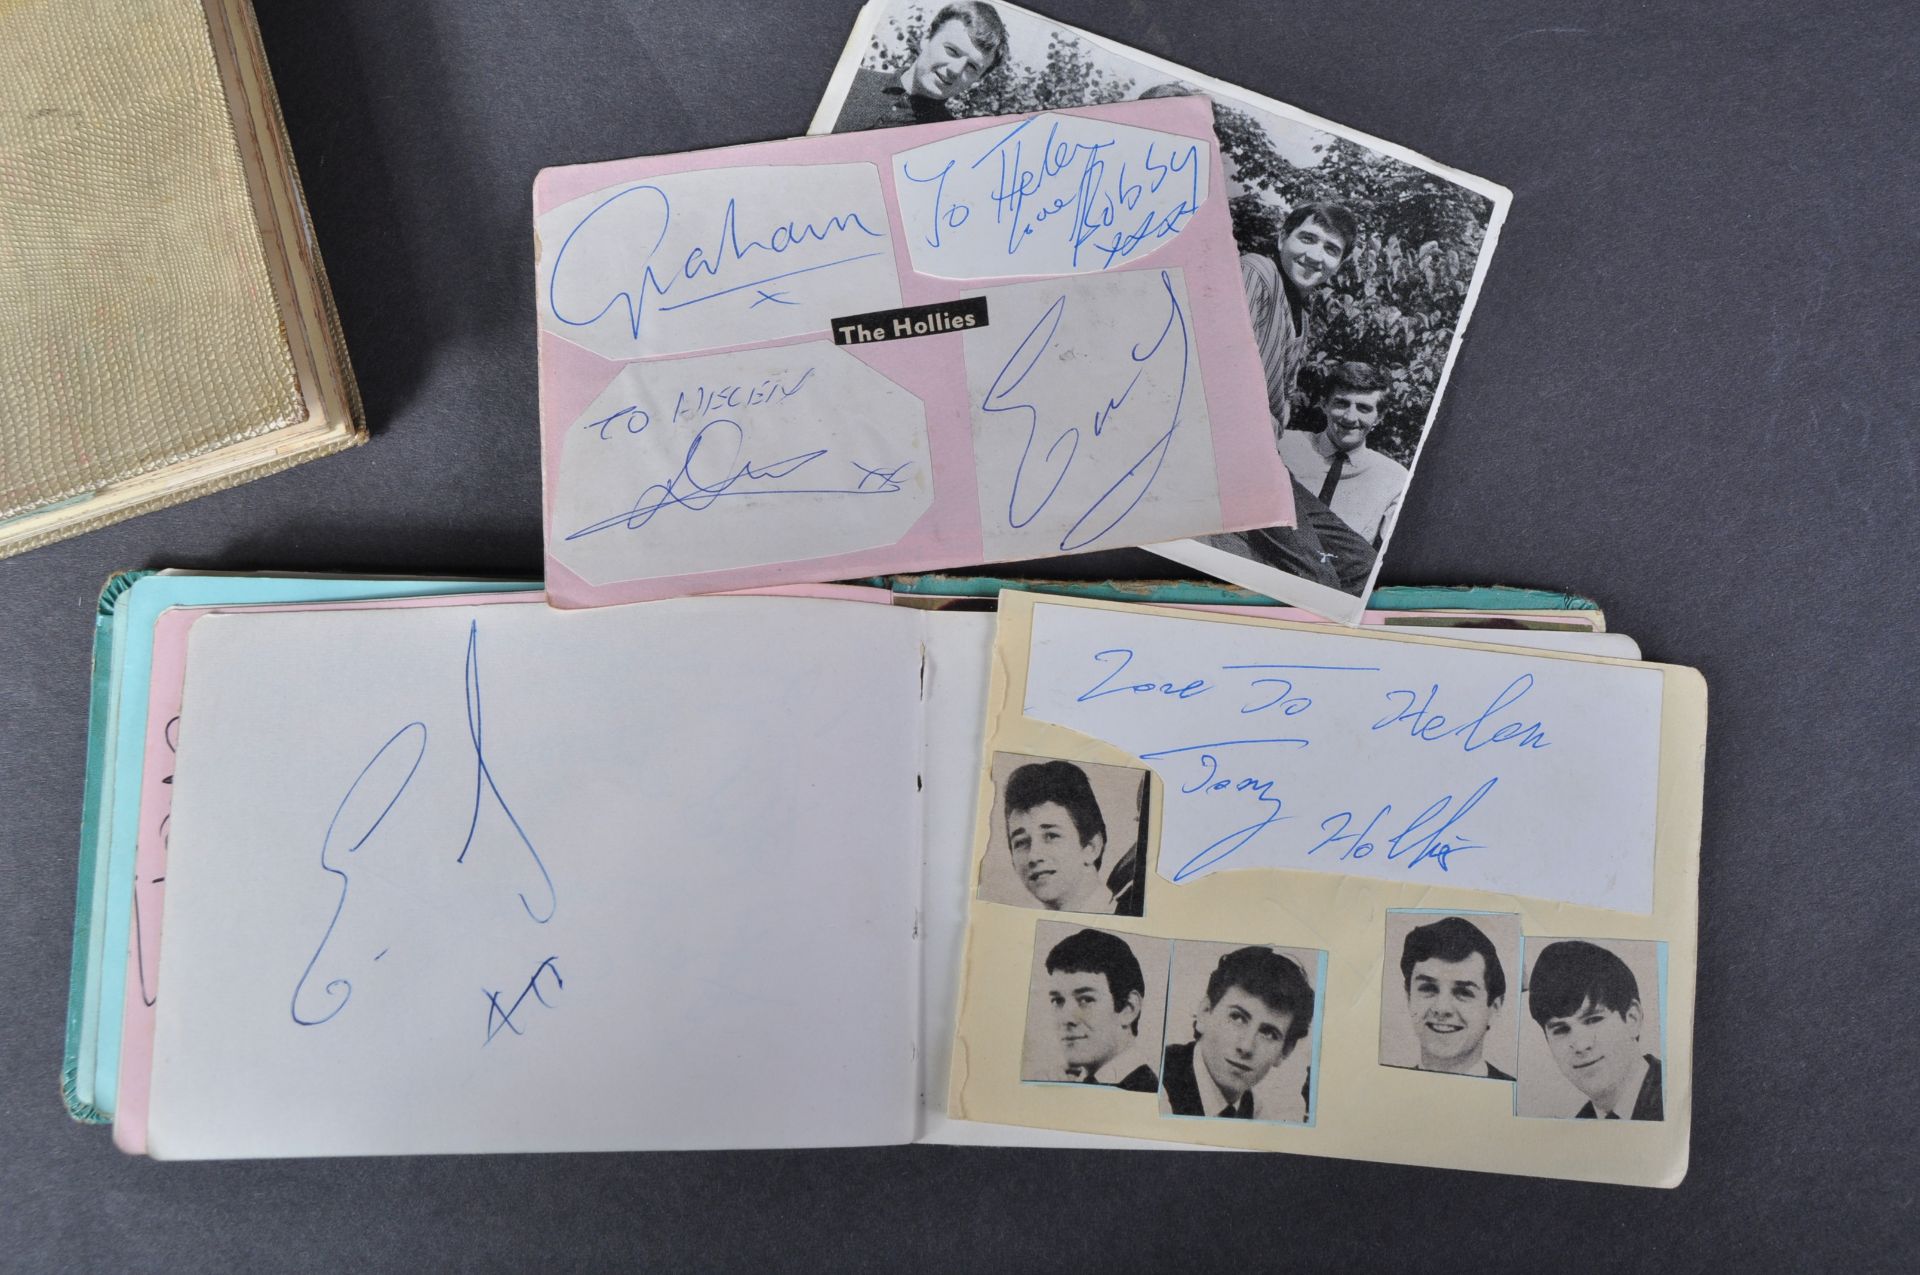 1960S MUSIC AUTOGRAPH ALBUMS - OBTAINED FROM DISCS-A-GOGO - Image 19 of 31